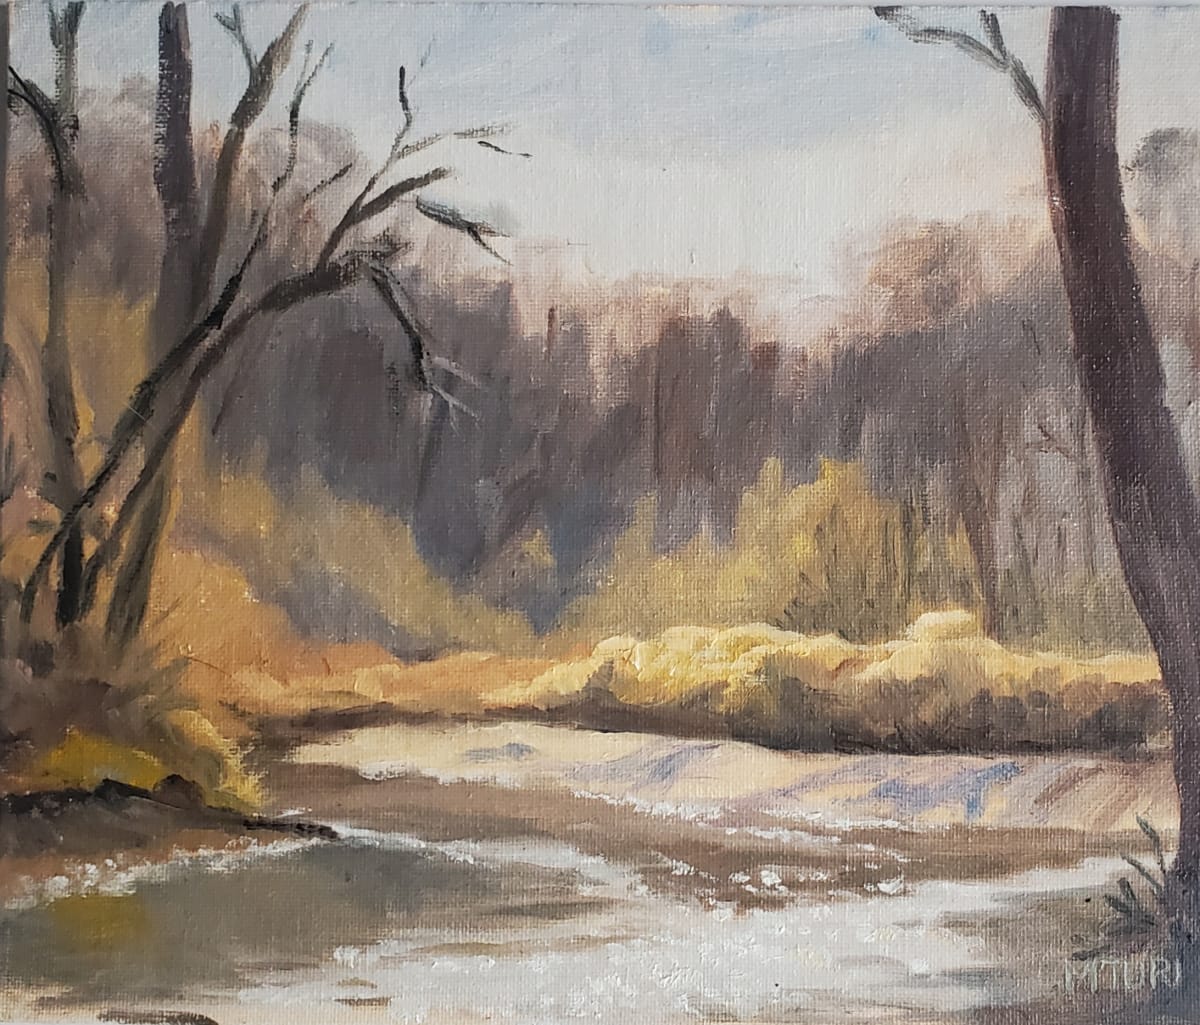 Late Autumn Backlight on the Chagrin by Mia Turi  Image: A plein air landscape on banks of the Chagrin River in Ohio.